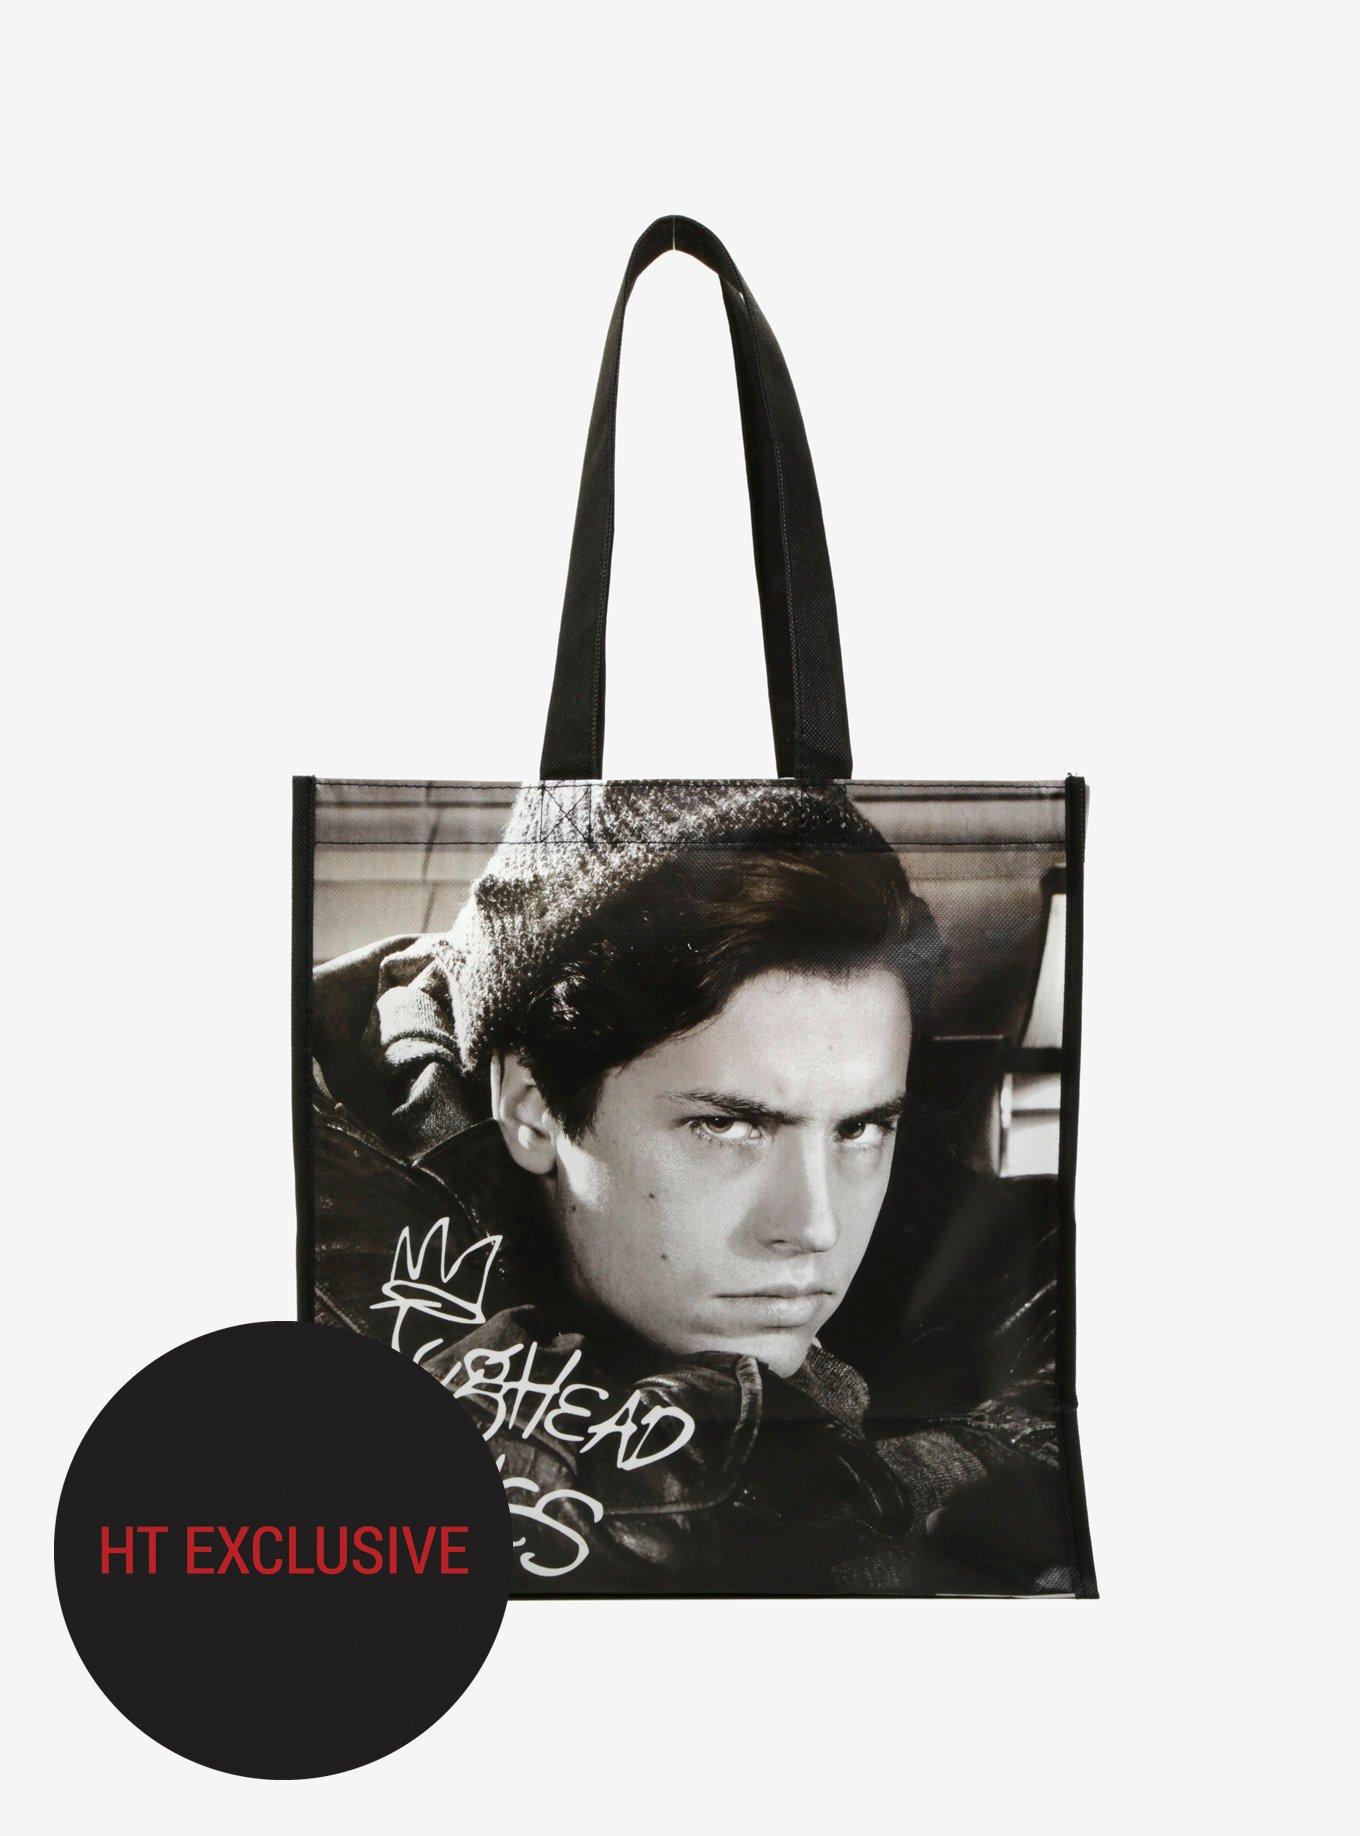 Riverdale Characters Reusable Tote Hot Topic Exclusive, , hi-res